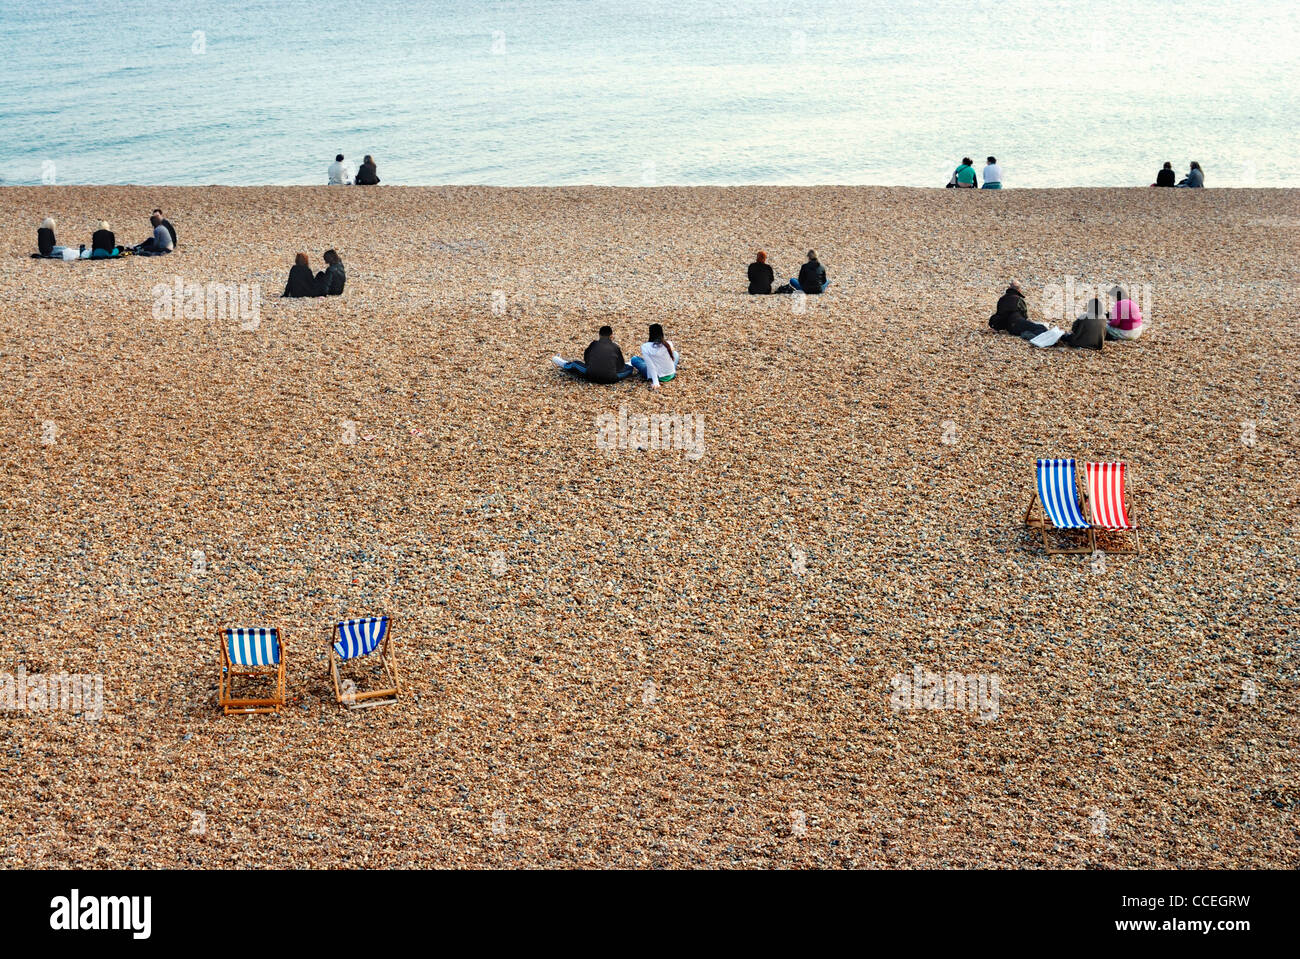 People and deckchairs, Brighton beach, Brighton, East sussex,england,uk Stock Photo